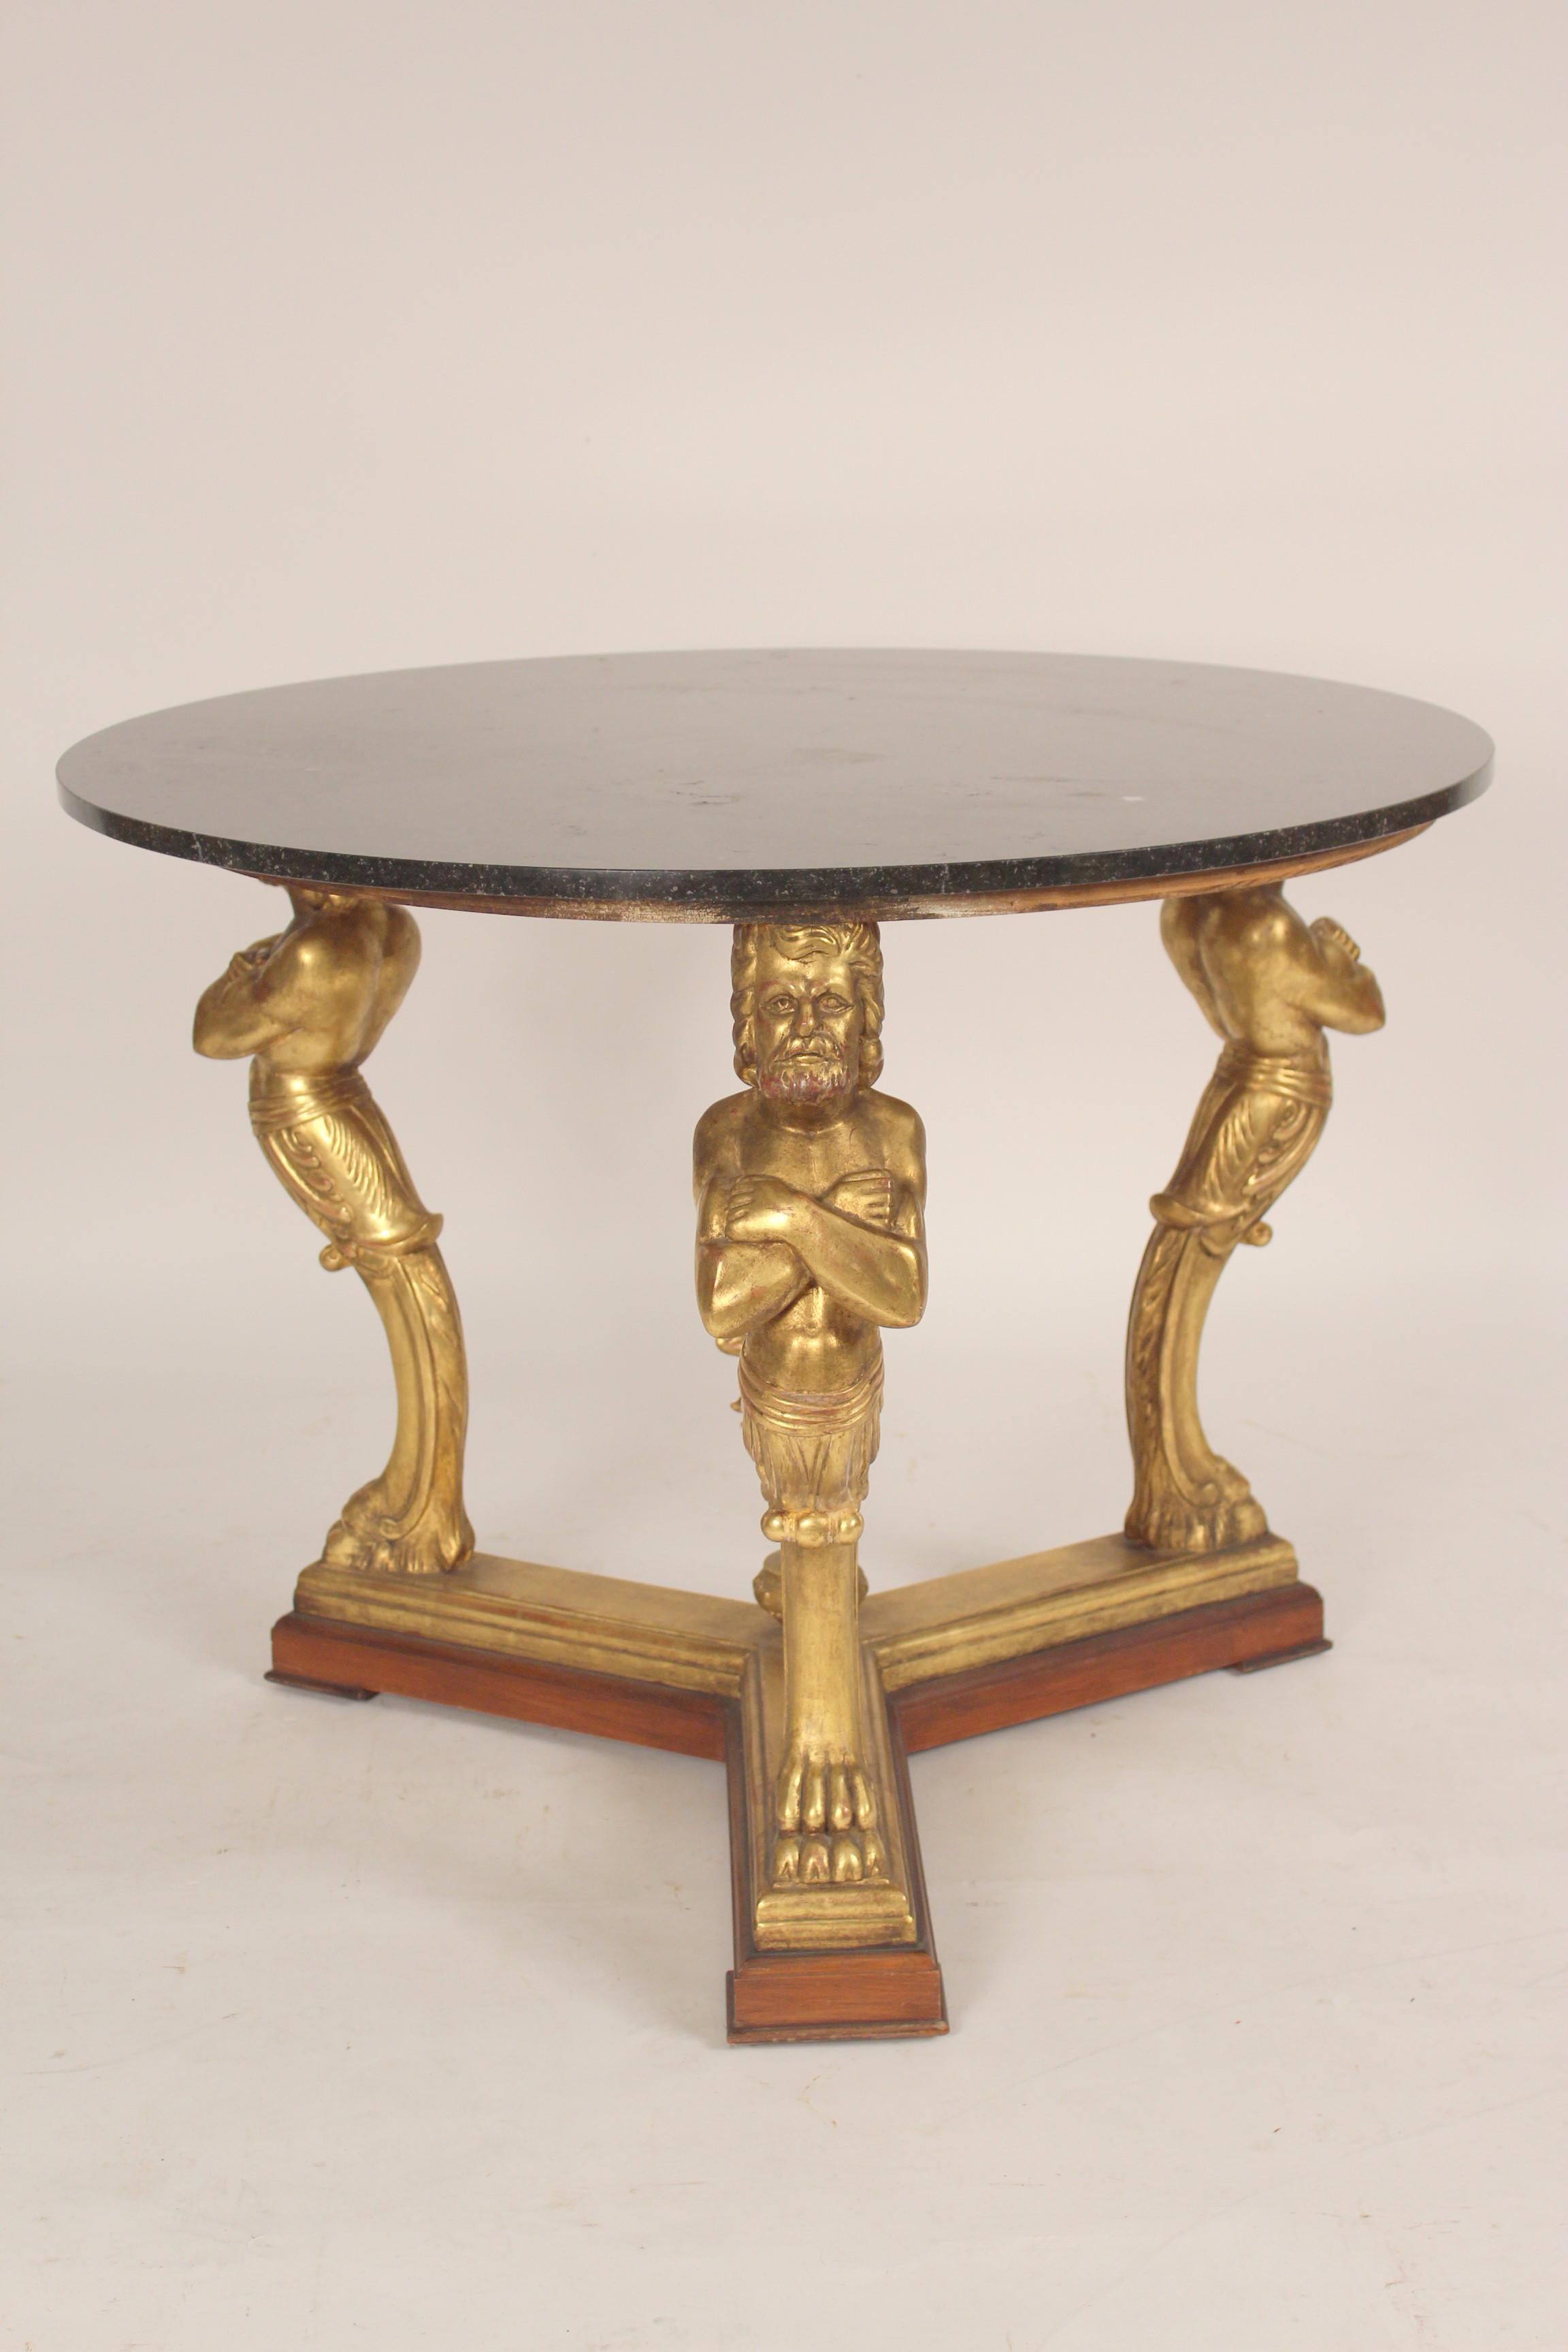 Neo classical style gilt decorated center table with a marble top, late 20th century. With carved figural supports, gold leaf decoration and a marble top.